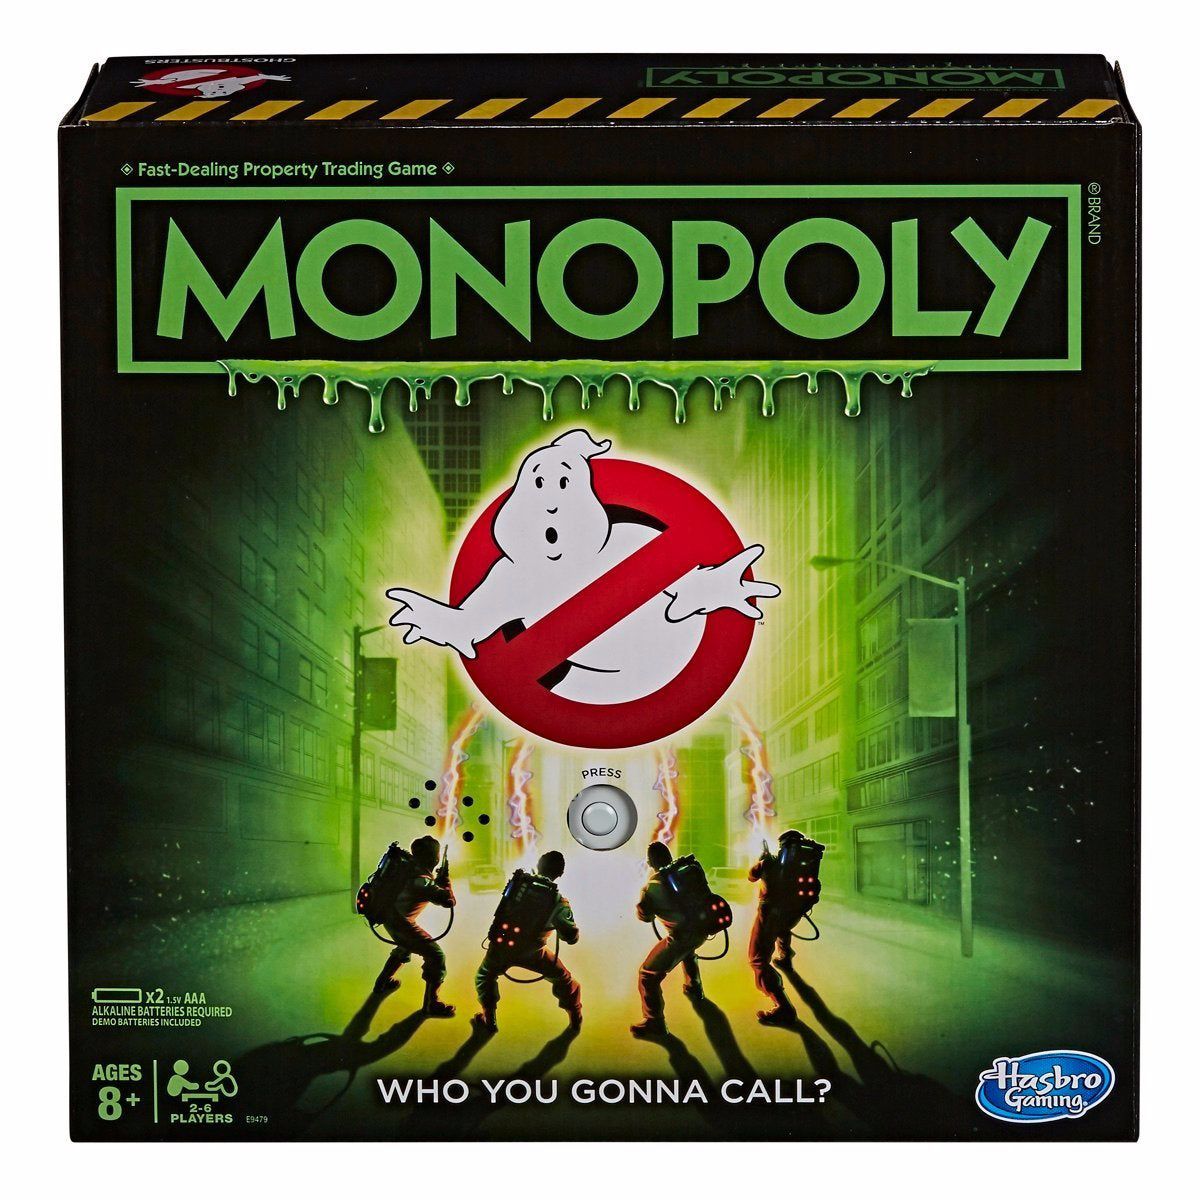 Ghostbusters Monopoly Game #1